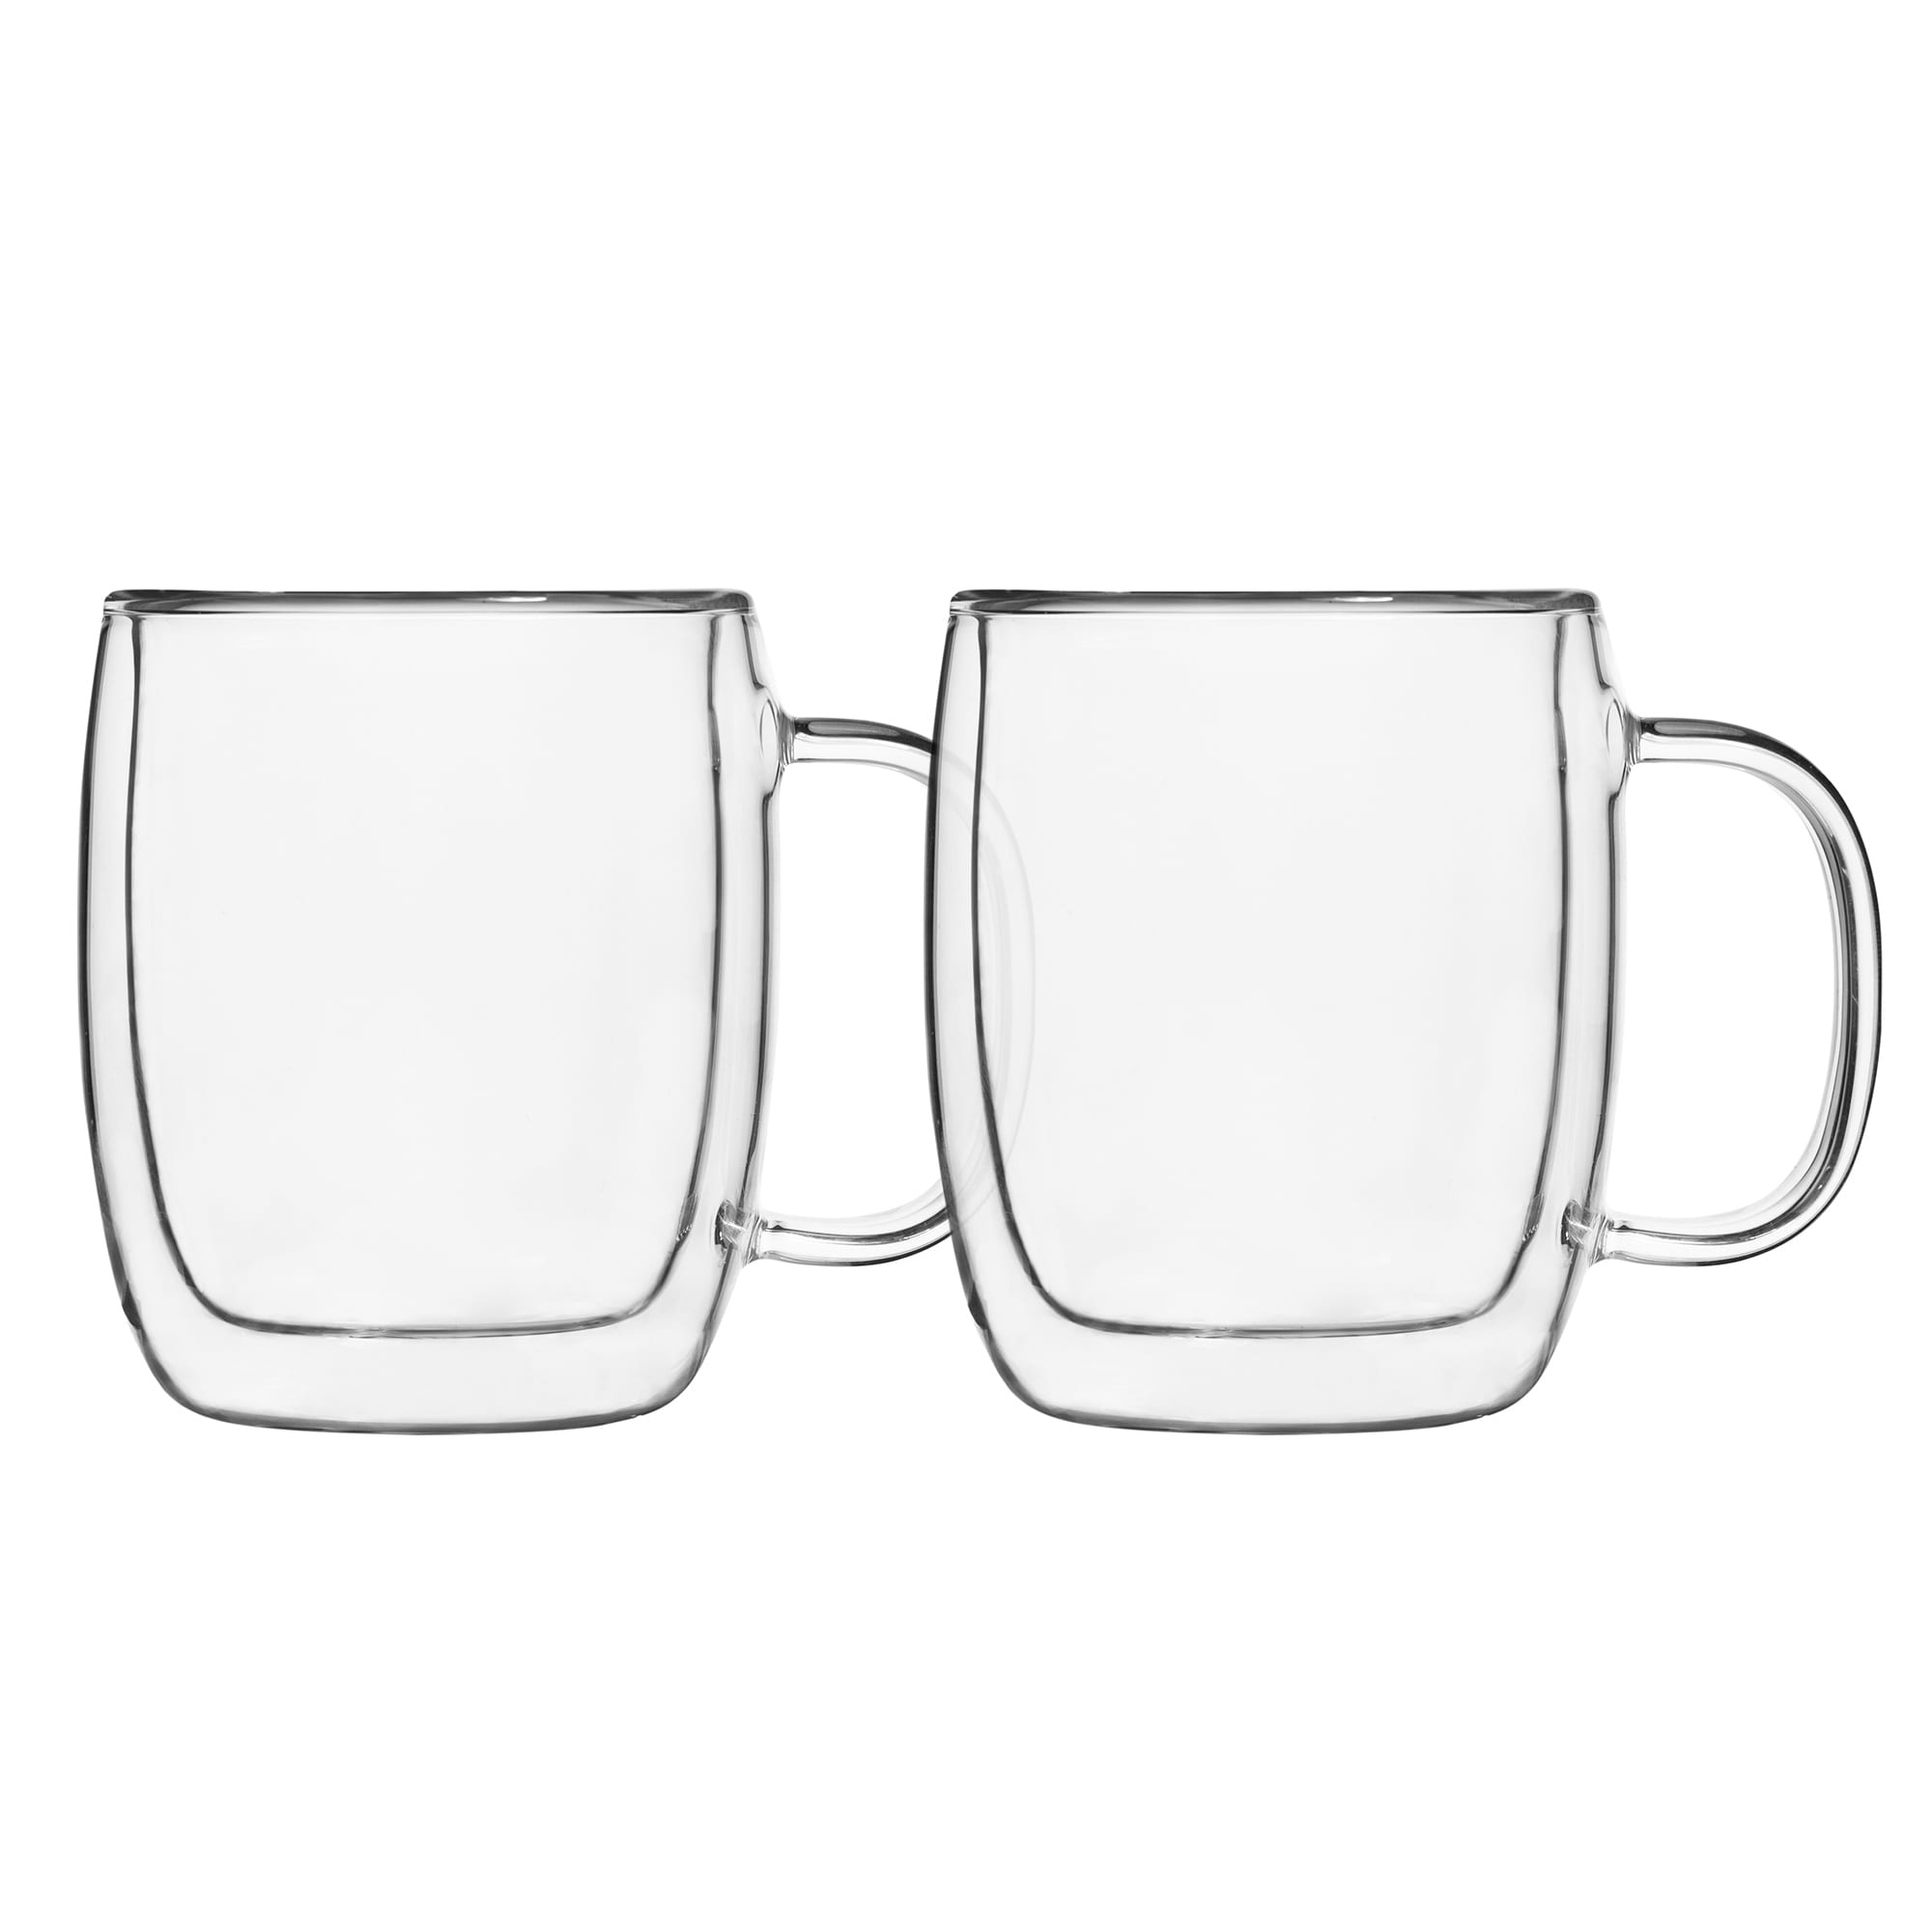 https://ak1.ostkcdn.com/images/products/is/images/direct/1cb1543b908633e04b14936cd918c6cd72855b2e/Insulated-Double-Wall-Mug-Cup-Glass-Set-of-4-Mugs-Cups-Thermal%2C250ml.jpg